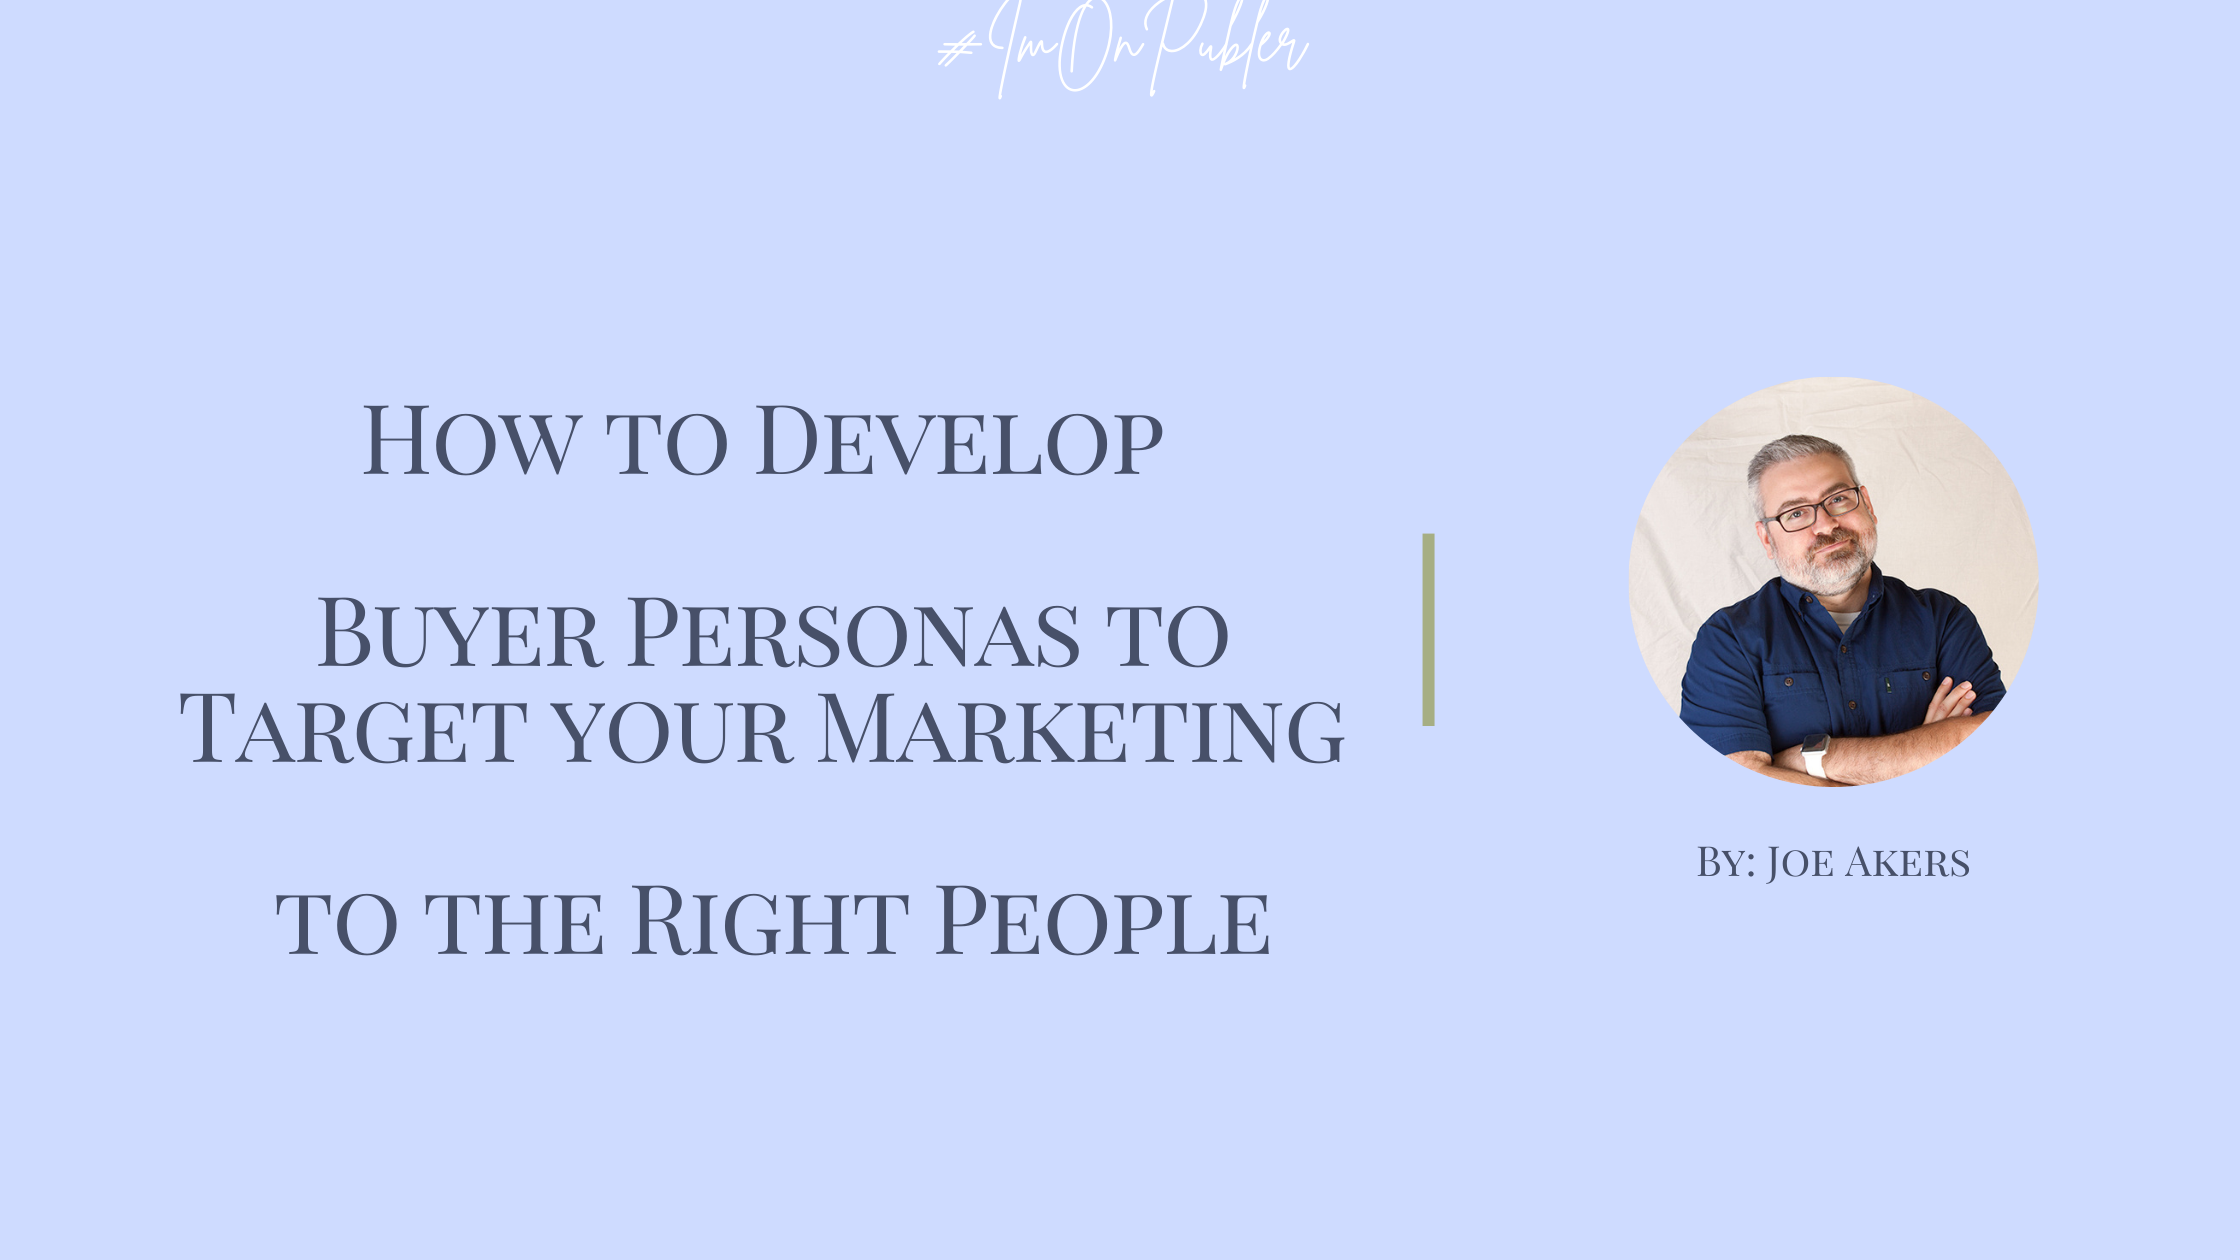 How to Develop Buyer Personas to Target your Marketing to the Right People by Joe Akers